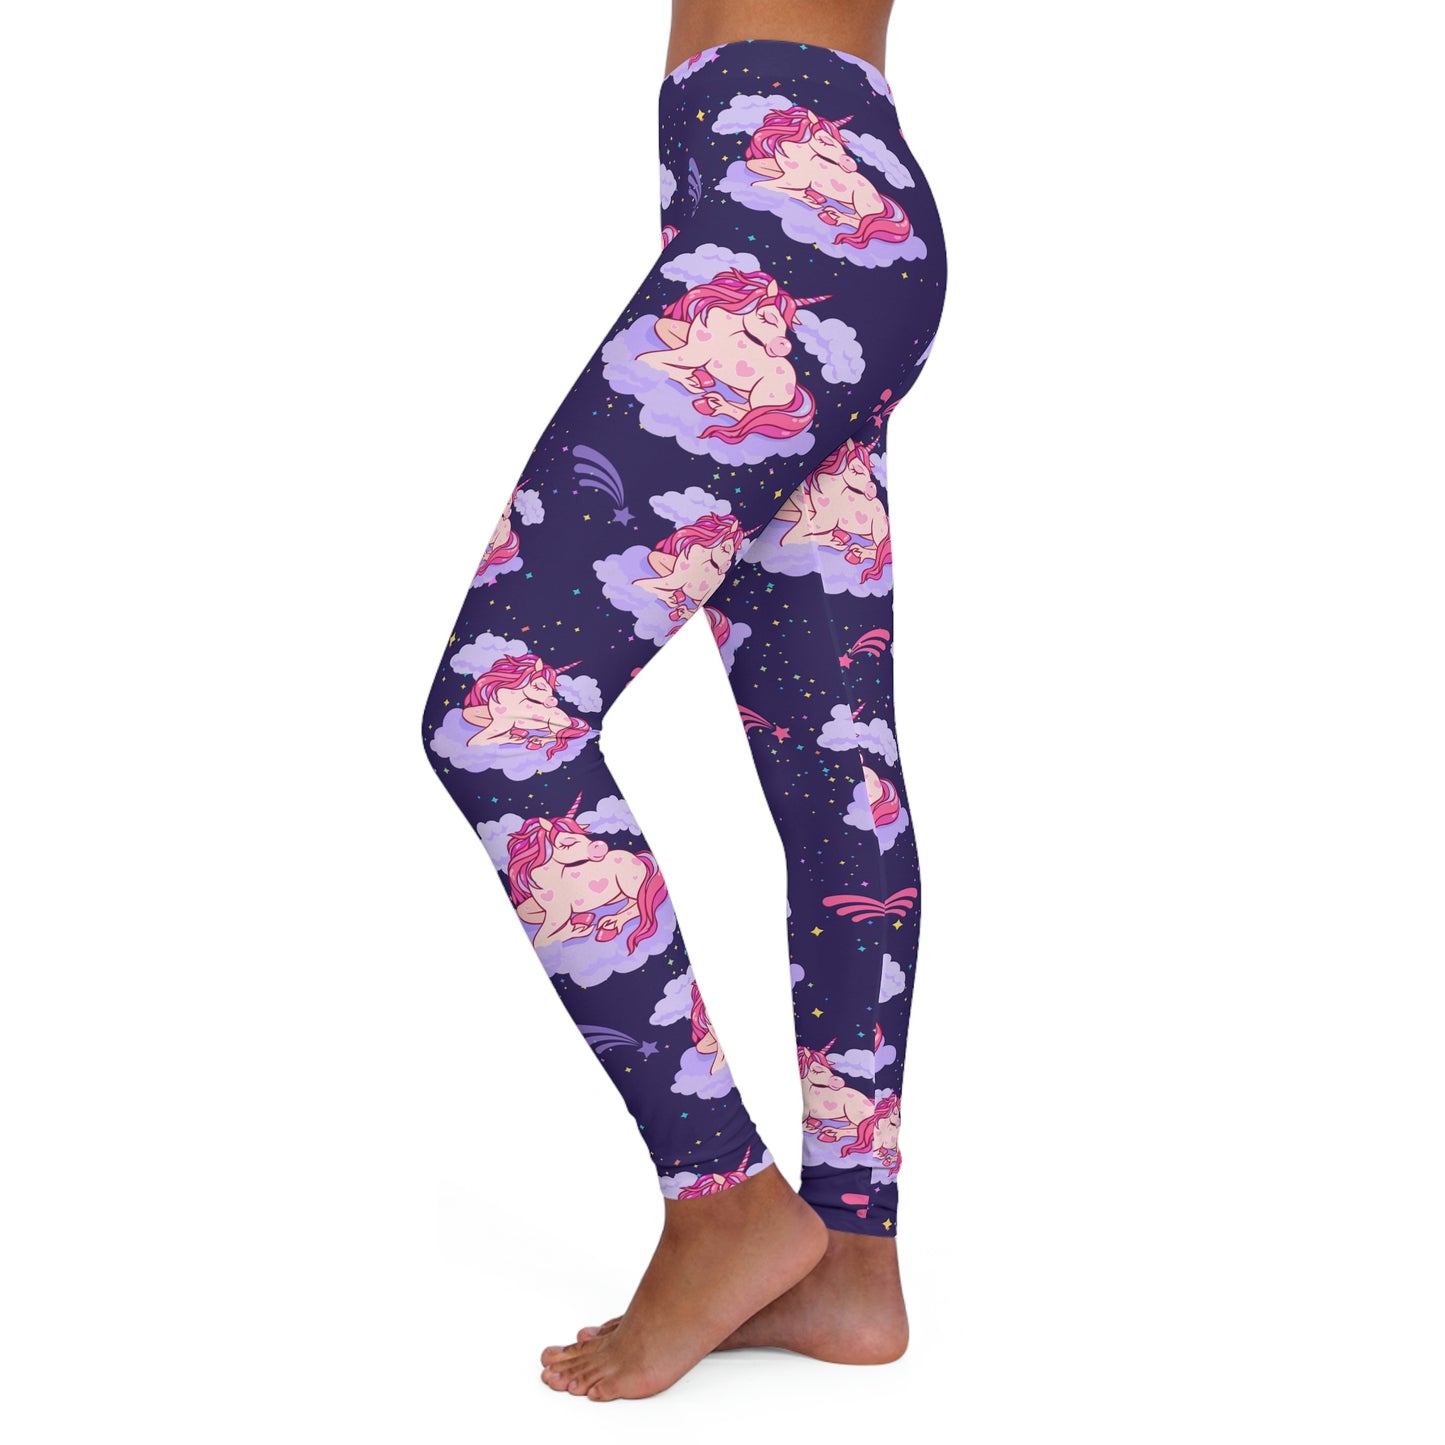 Unicorn animal kingdom, Safari Plus Size Leggings, One of a Kind Gift - Workout Activewear tights for Wife Fitness, Best Friend, mom and me tights Christmas Gift